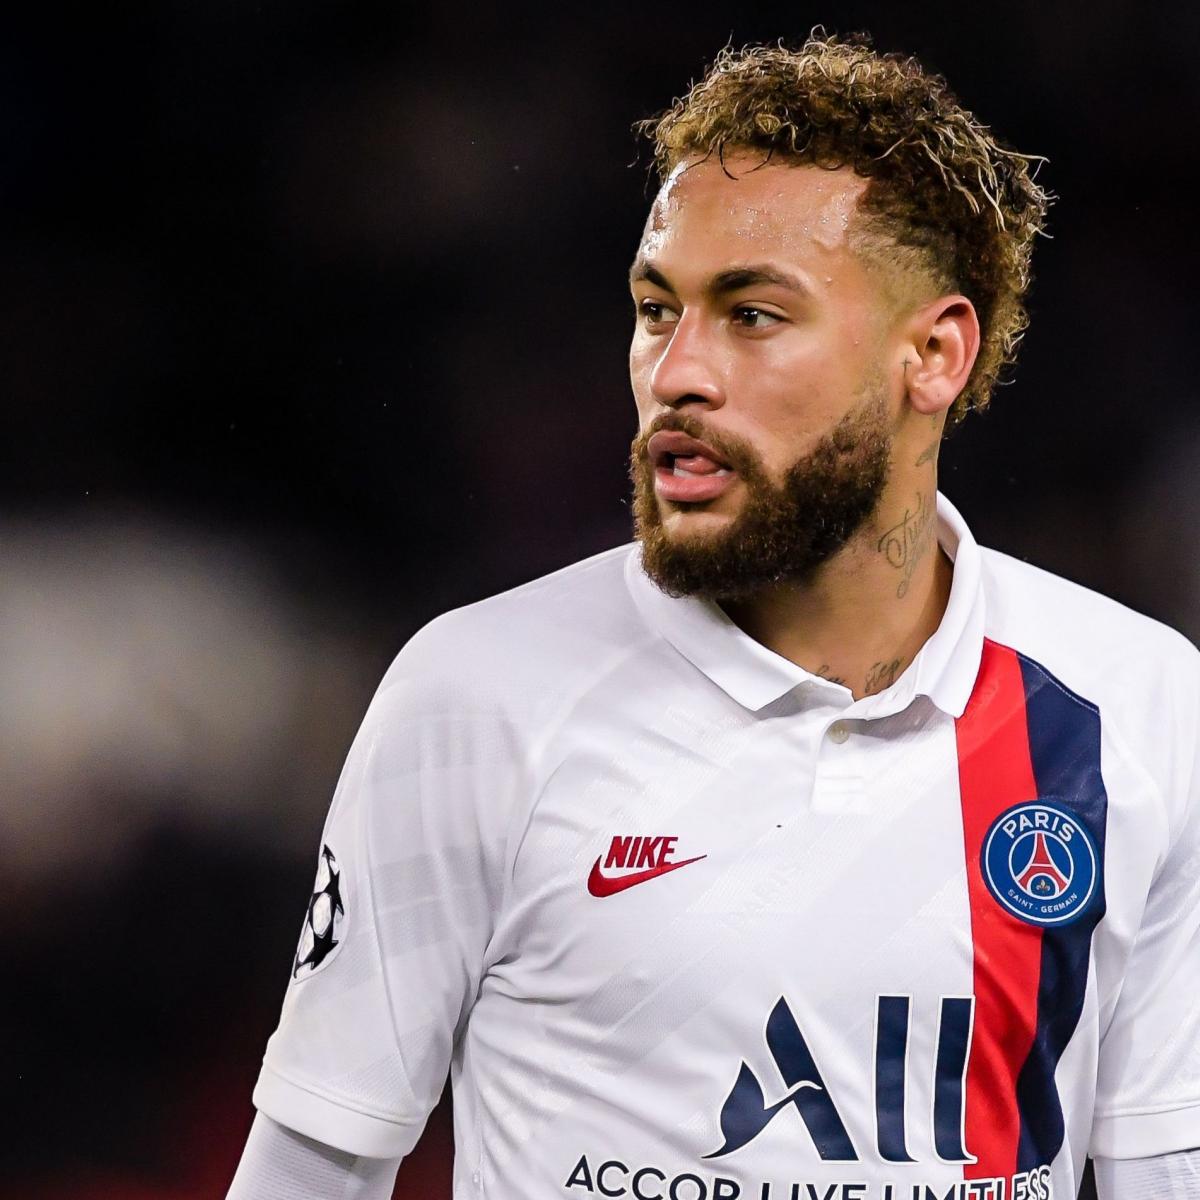 ge] Out of shape? Neymar says he's at the ideal weight: The shirt was G.  In the next game I'll ask for M : r/psg